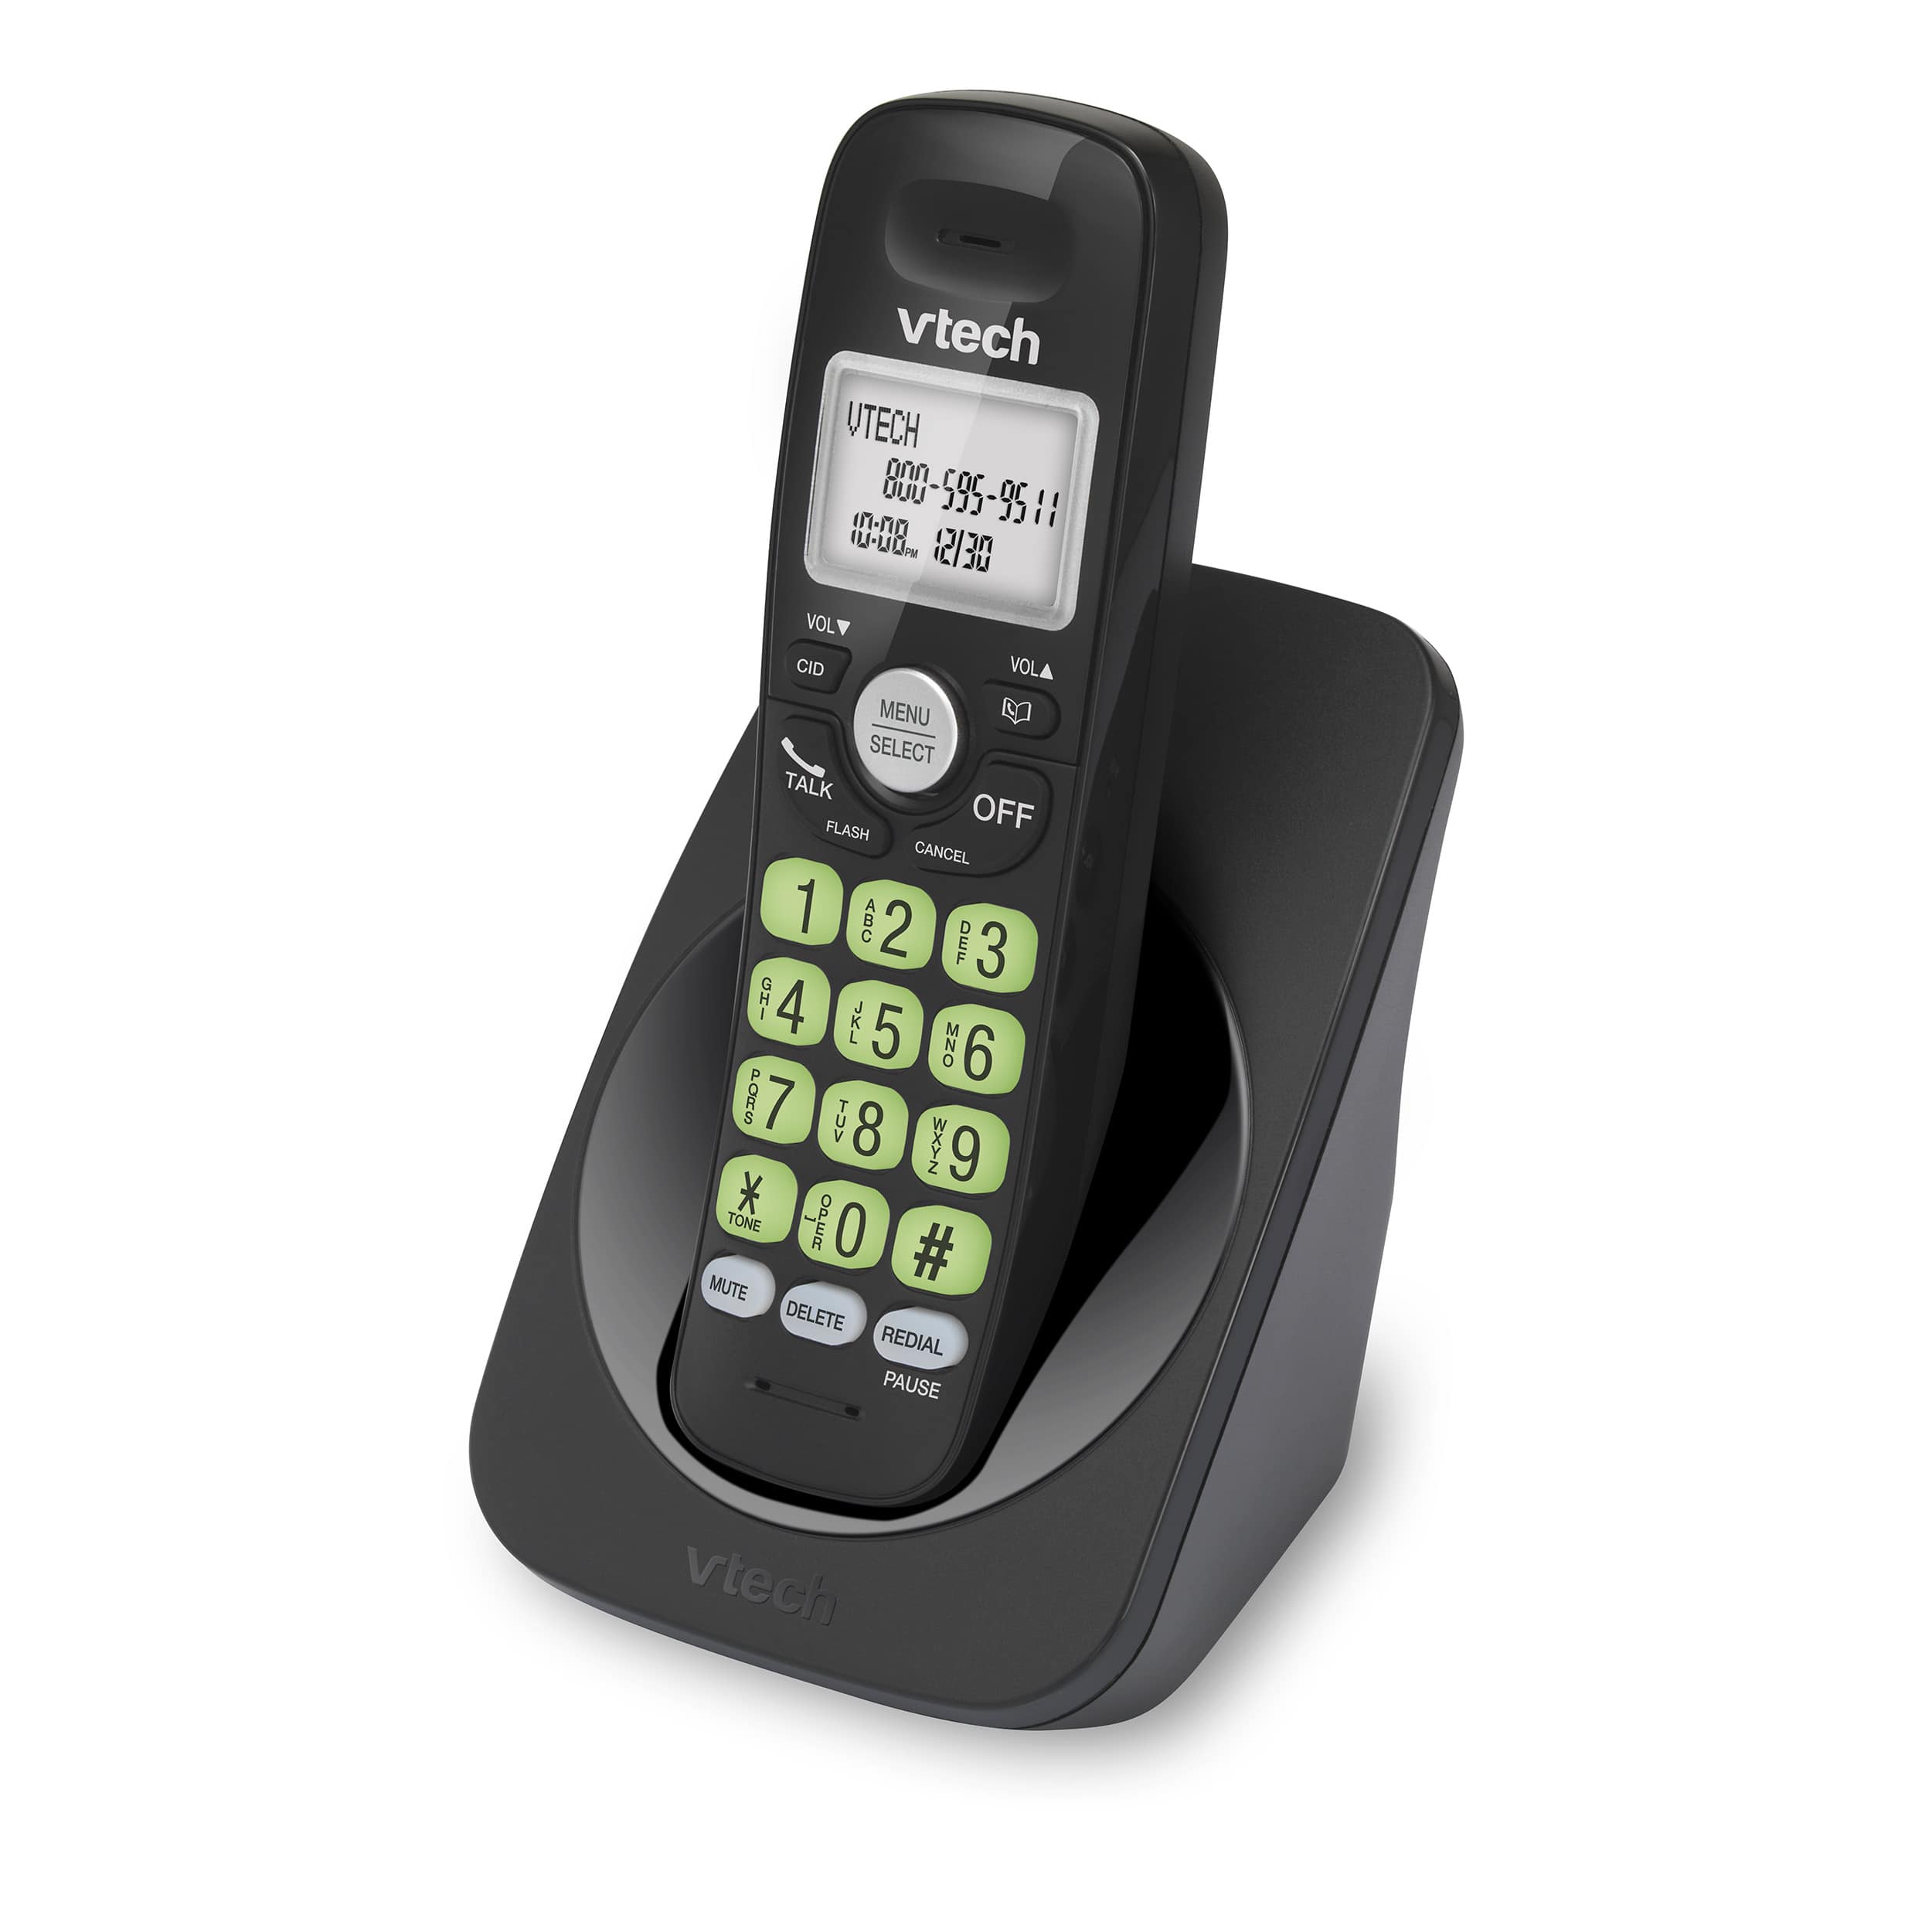 DECT 6.0 Cordless Phone with Full Duplex Speakerphone and Caller ID/Call Waiting (Black) - view 2